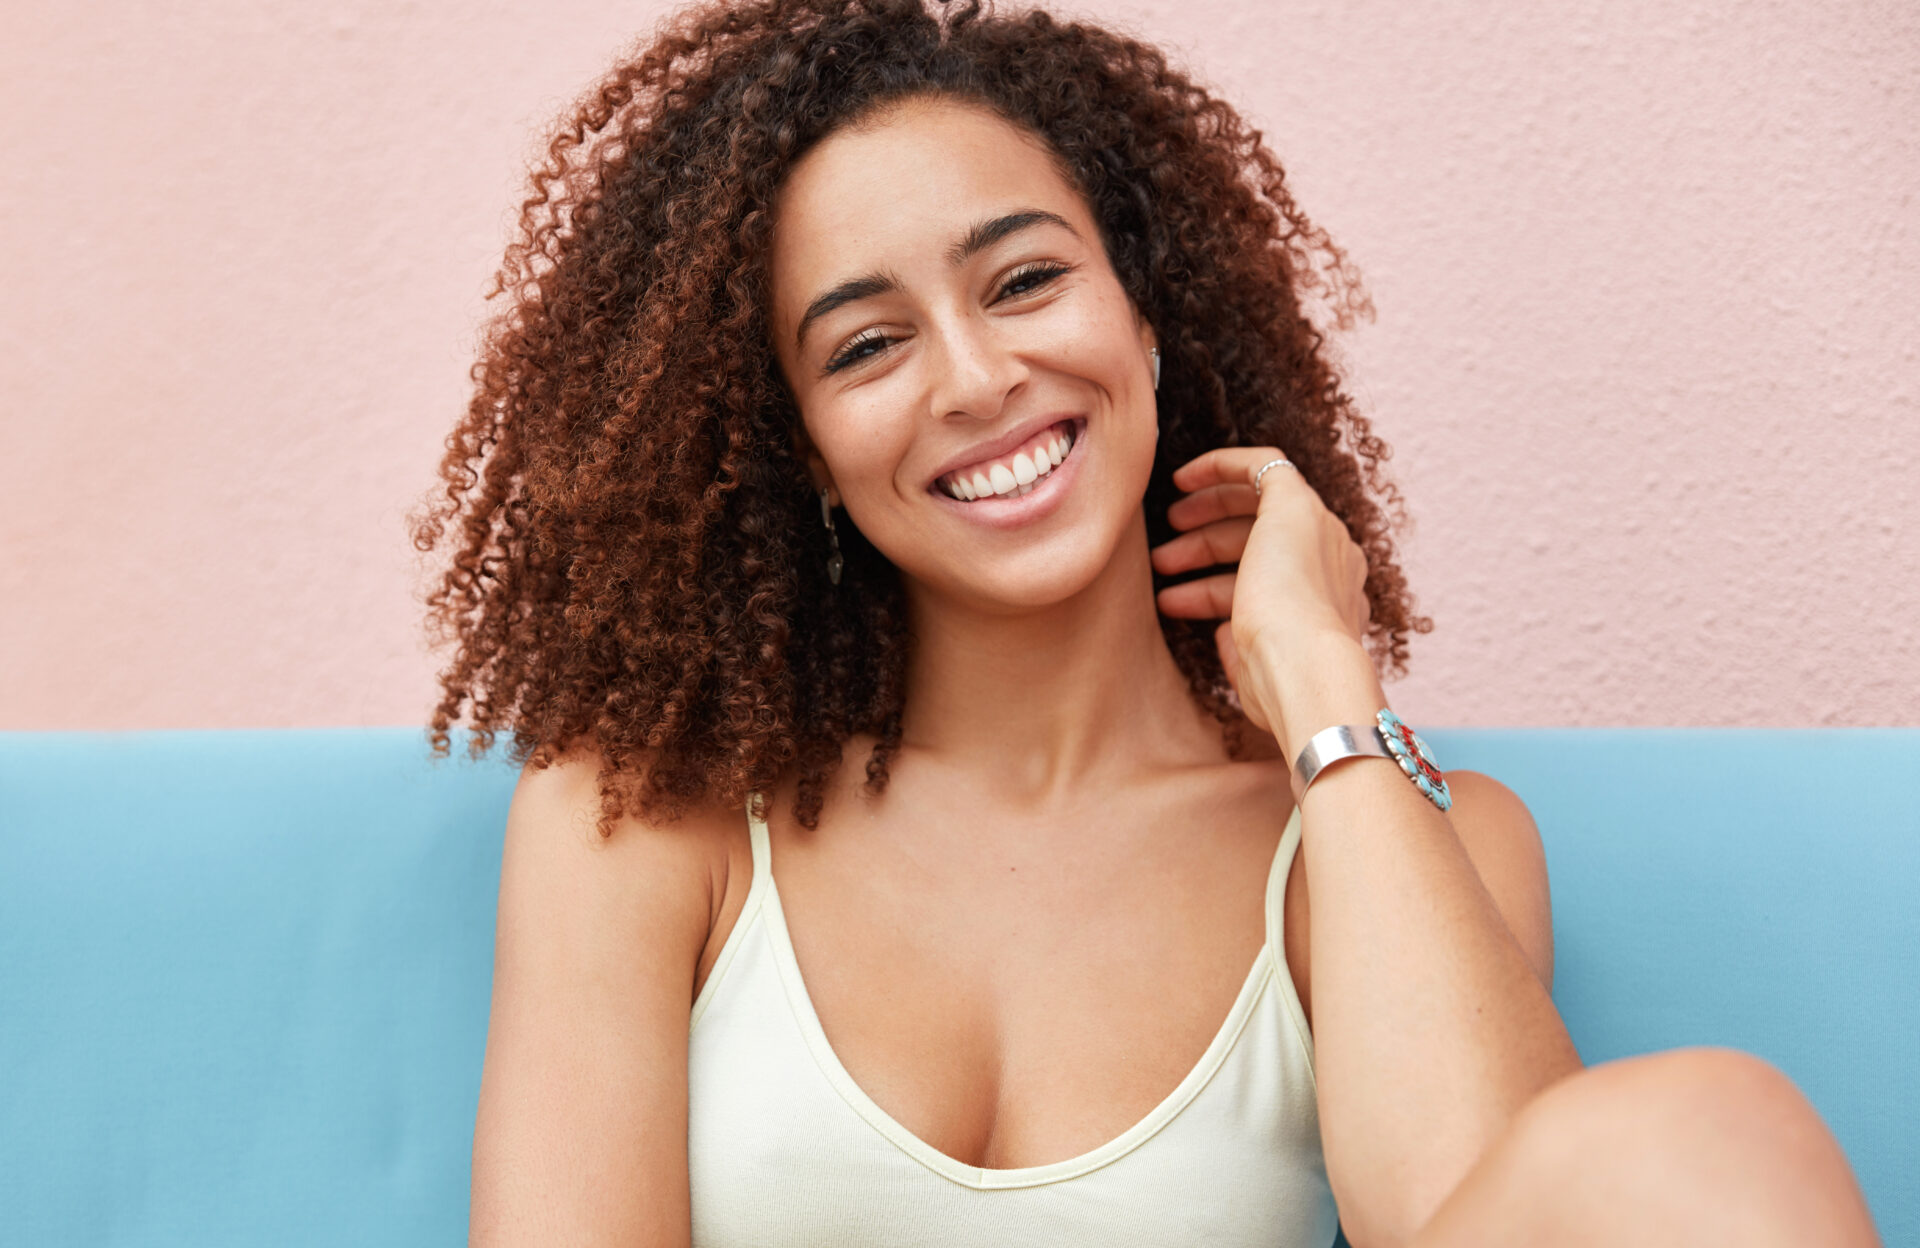 Lady smiling with white teeth and pastel background